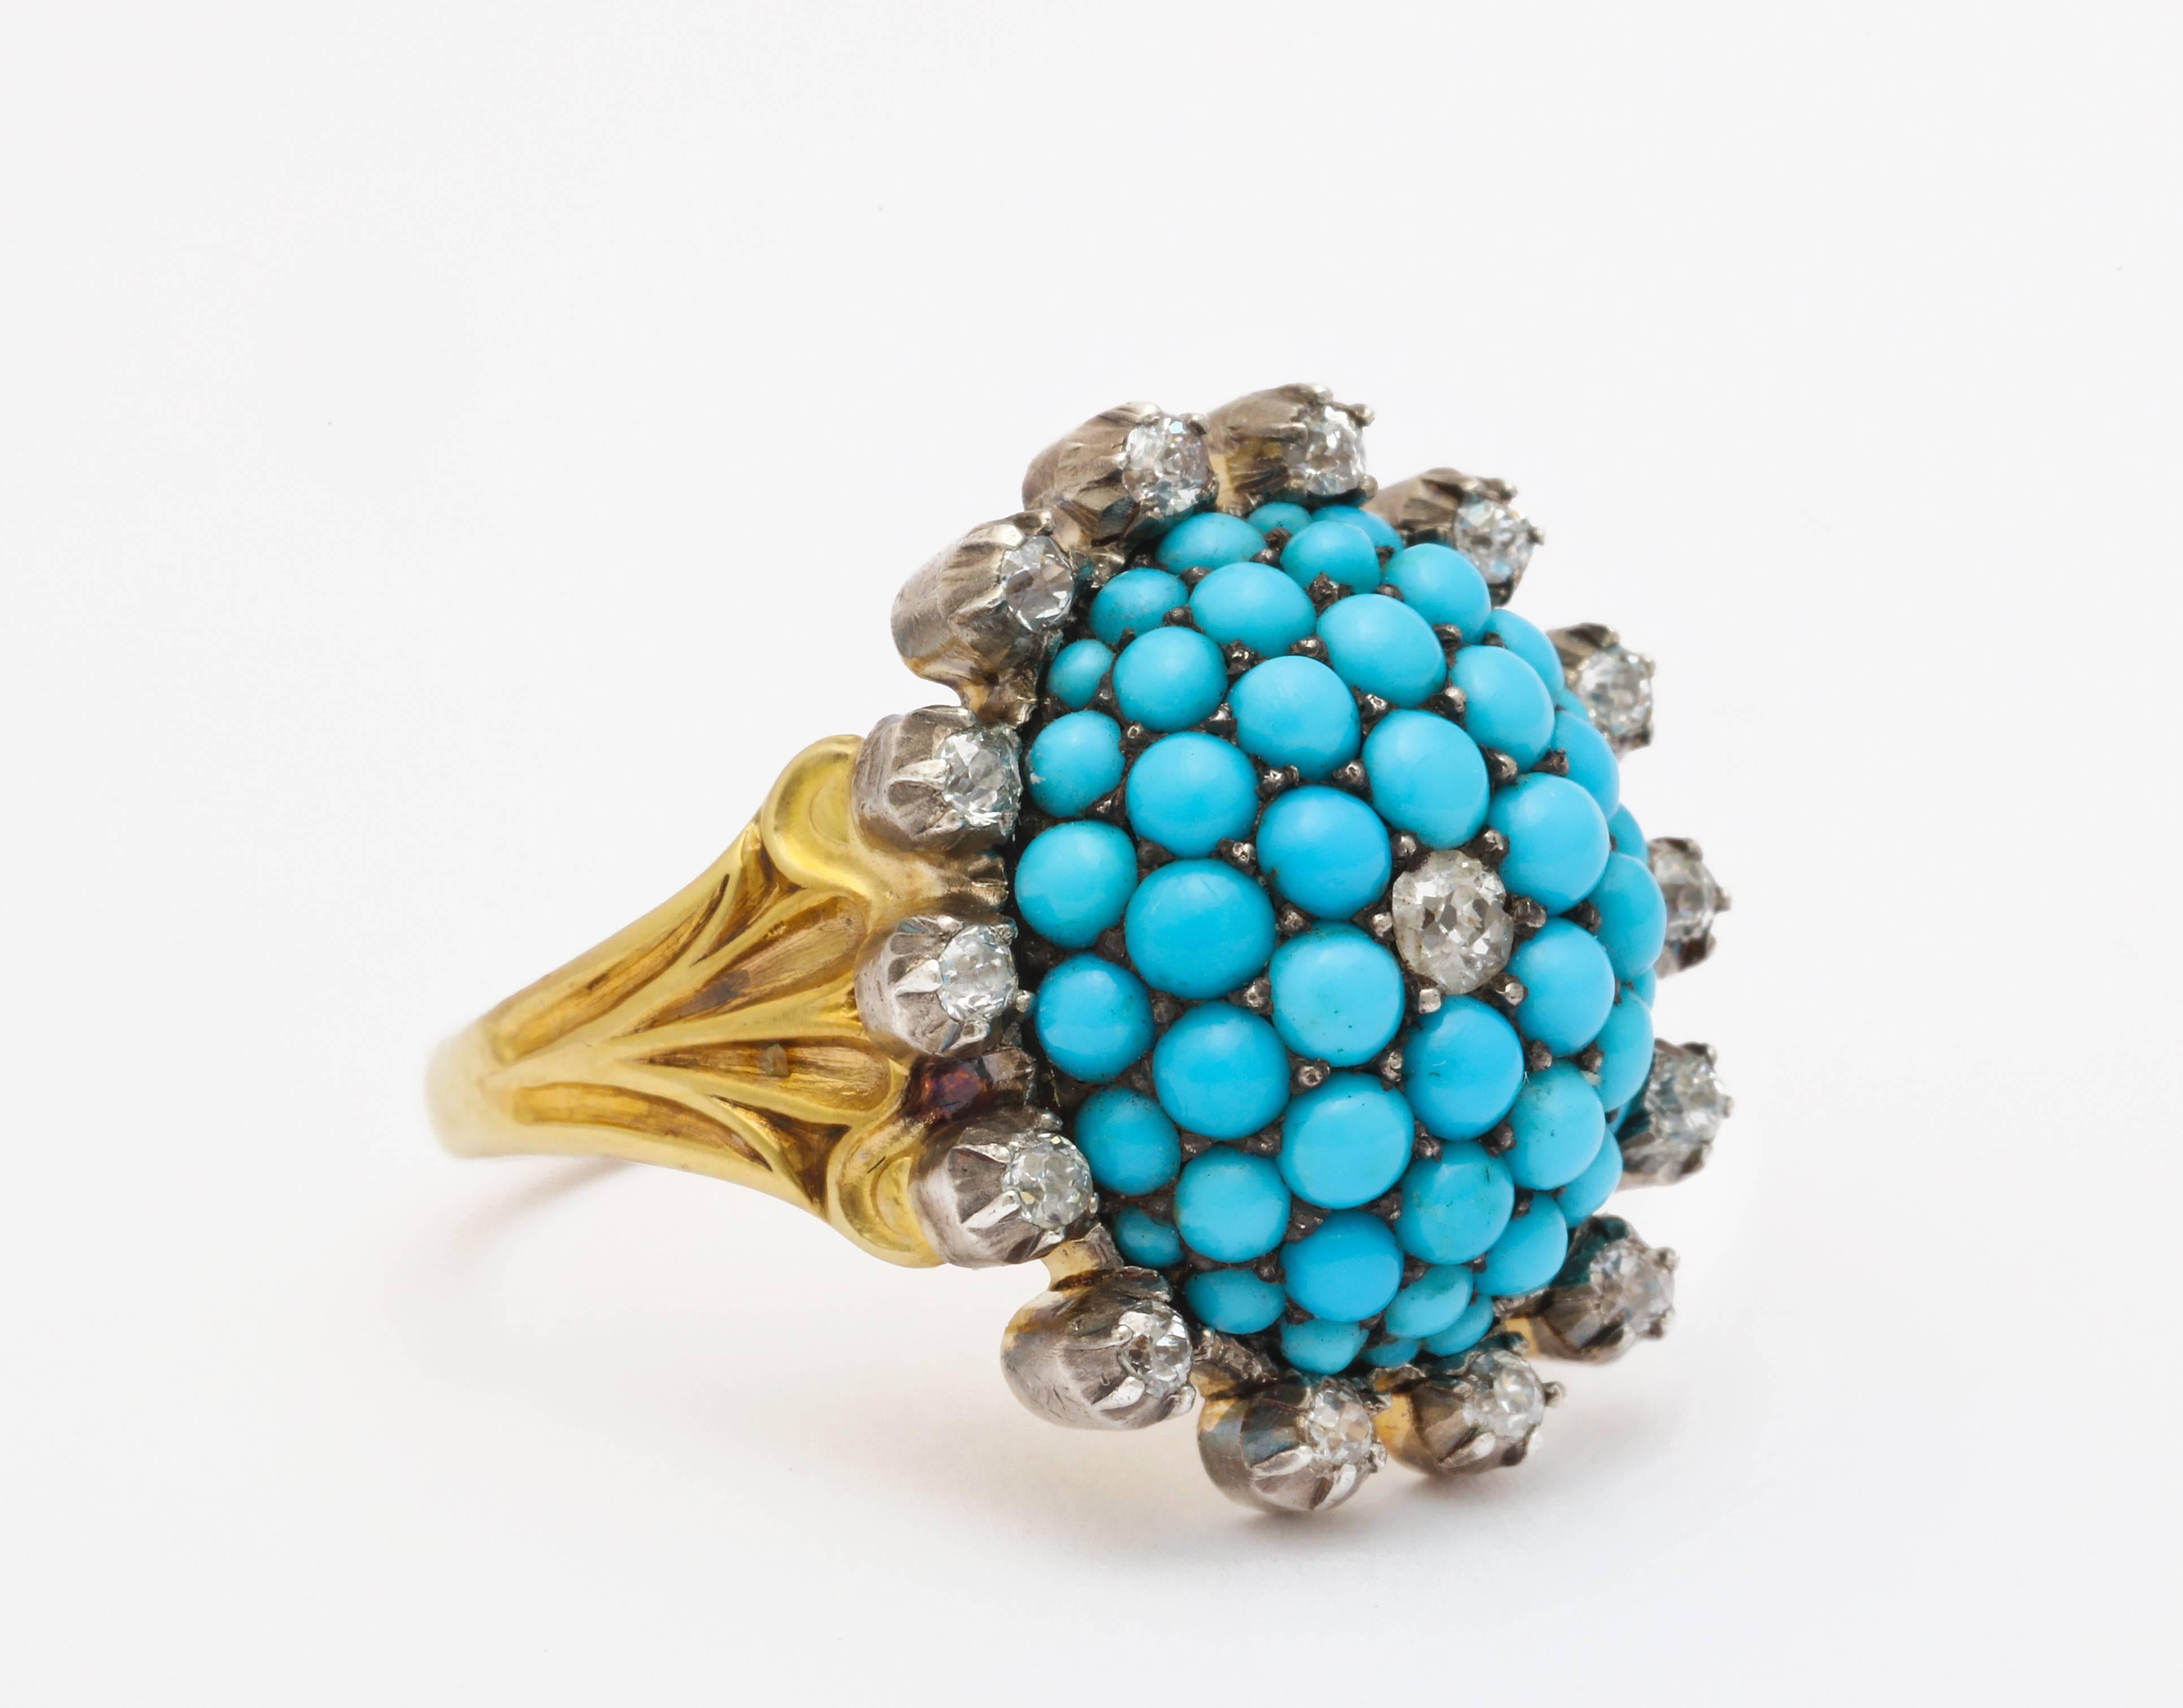 A perfectly matched cluster of sumptuous turquoise from Persia, set in pave,  centered and surrounded by European cut diamonds, is set in a shank of 15 kt gold which is original. The shank is engraved in a simple geometric floral  design almost art